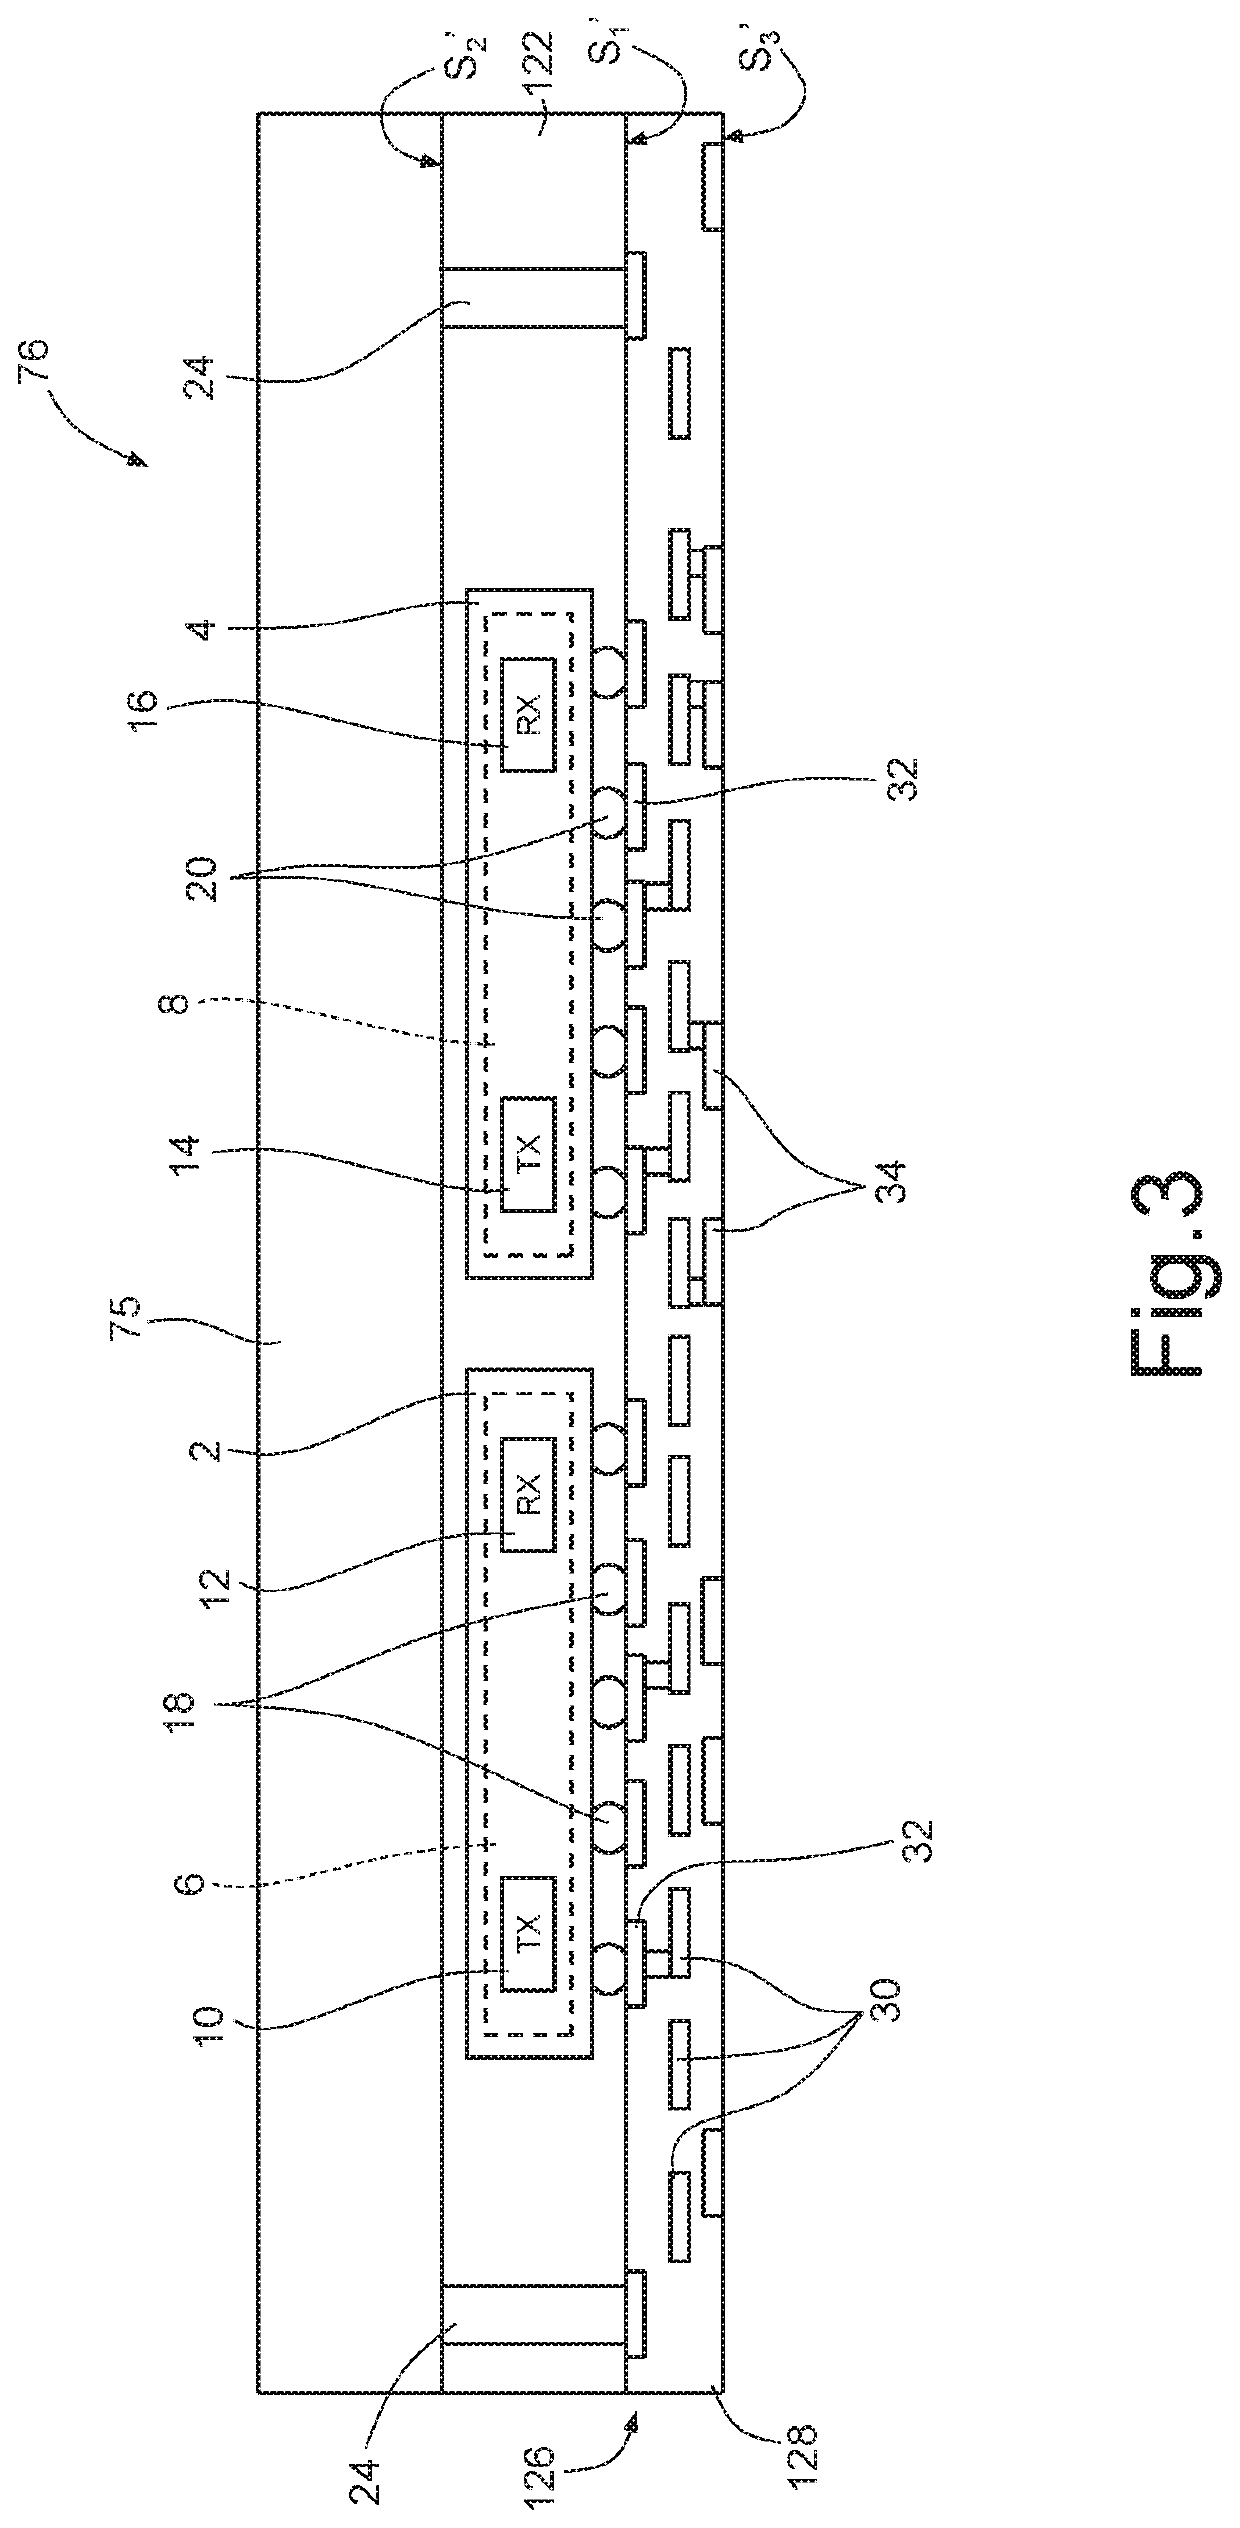 Process for manufacturing microelectromechanical devices, in particular electroacoustic modules